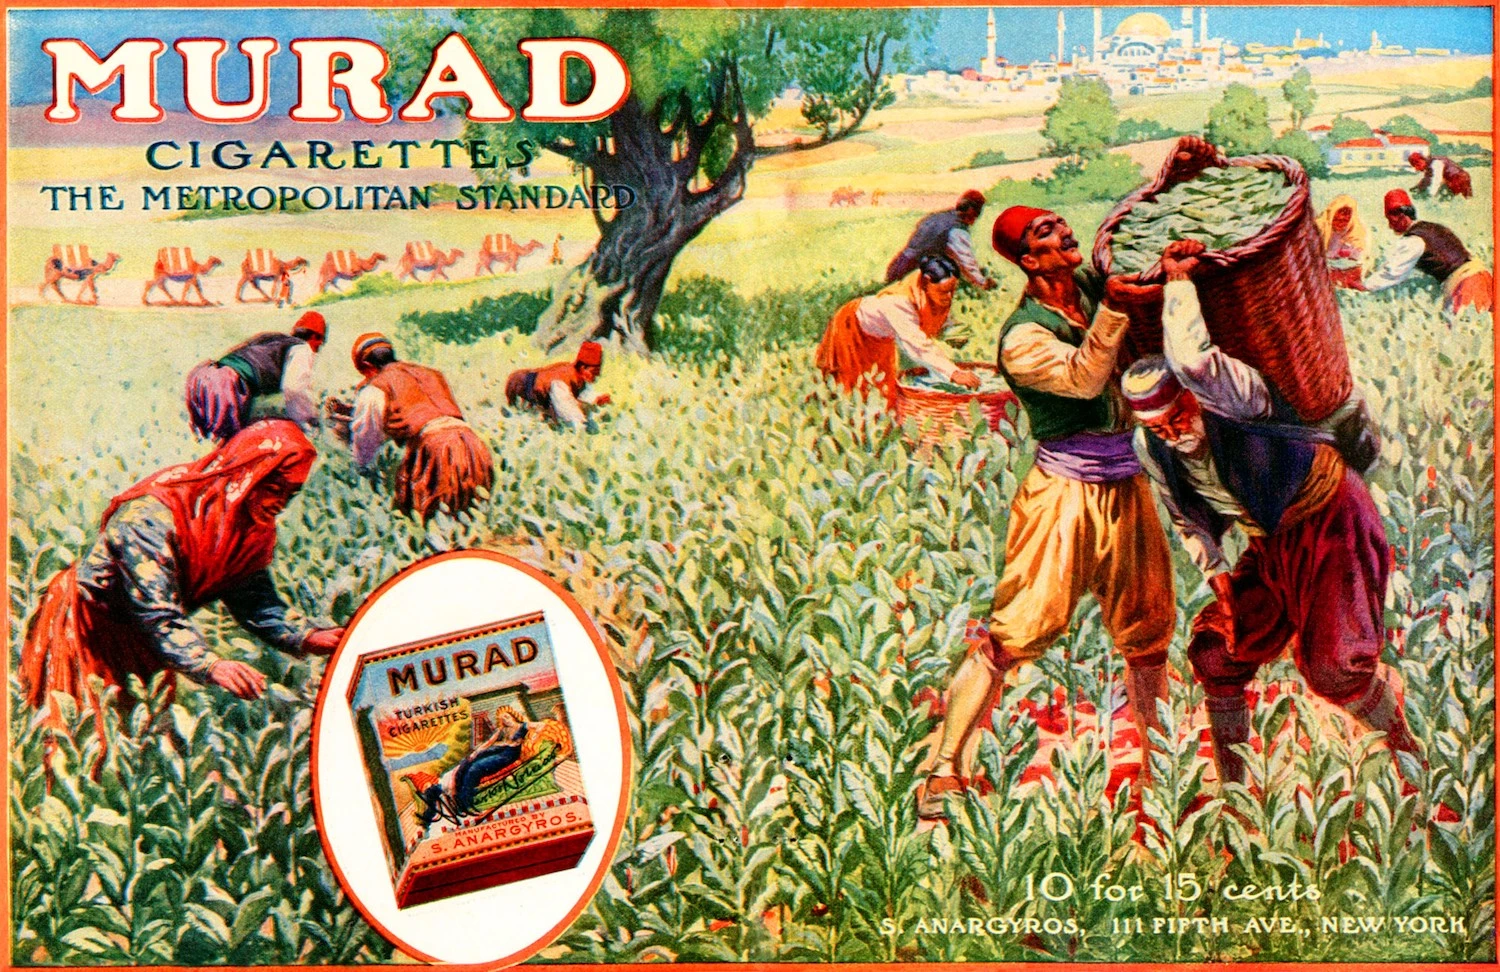 An advertisement for Murad Cigarettes showing people in Turkish garb harvesting tobacco in front of a mosque.